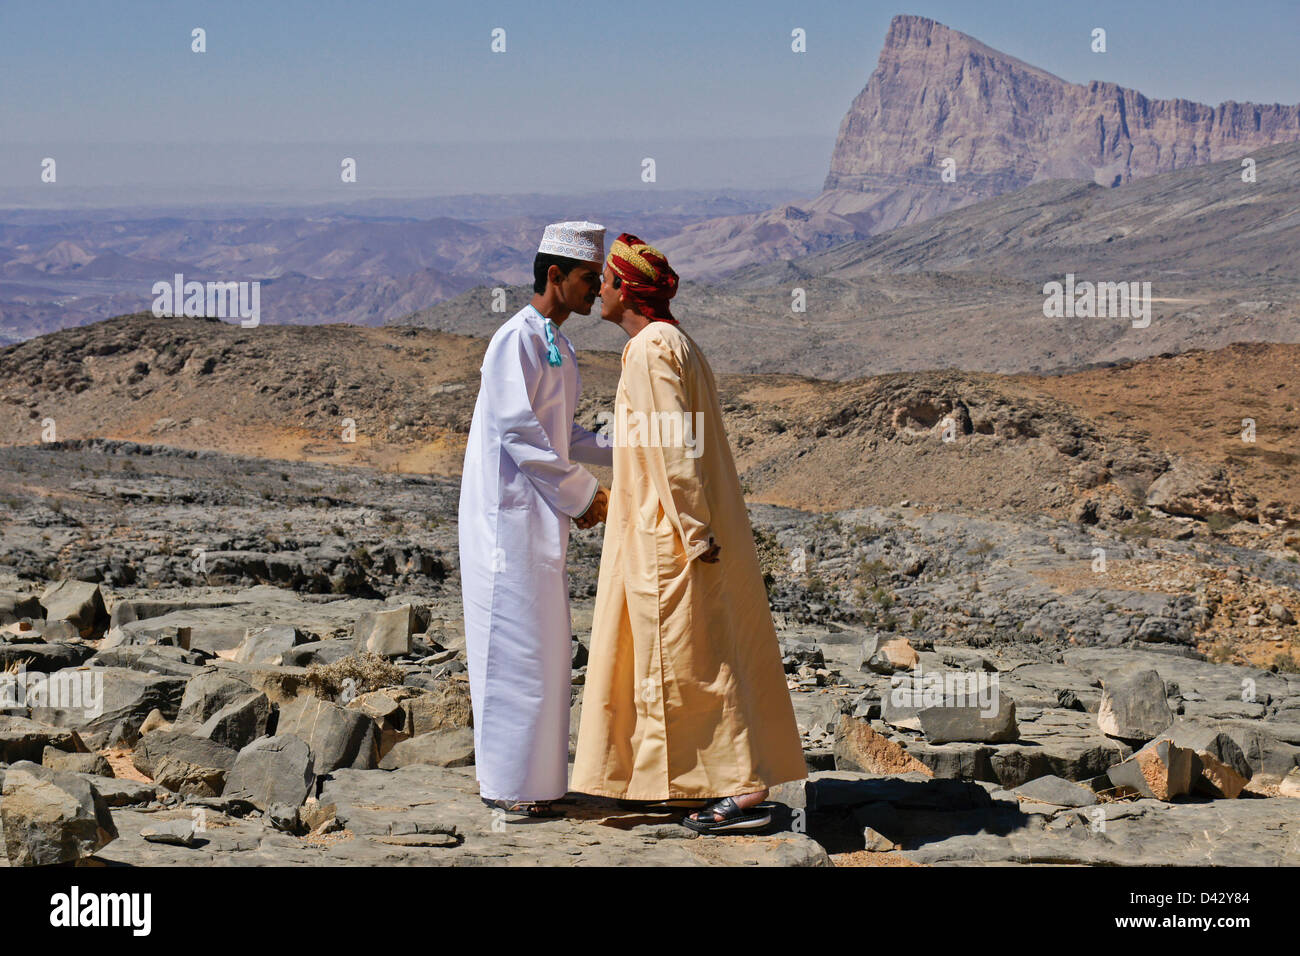 Omani men touching noses in greeting, Jebel Misht in background, Oman Stock Photo